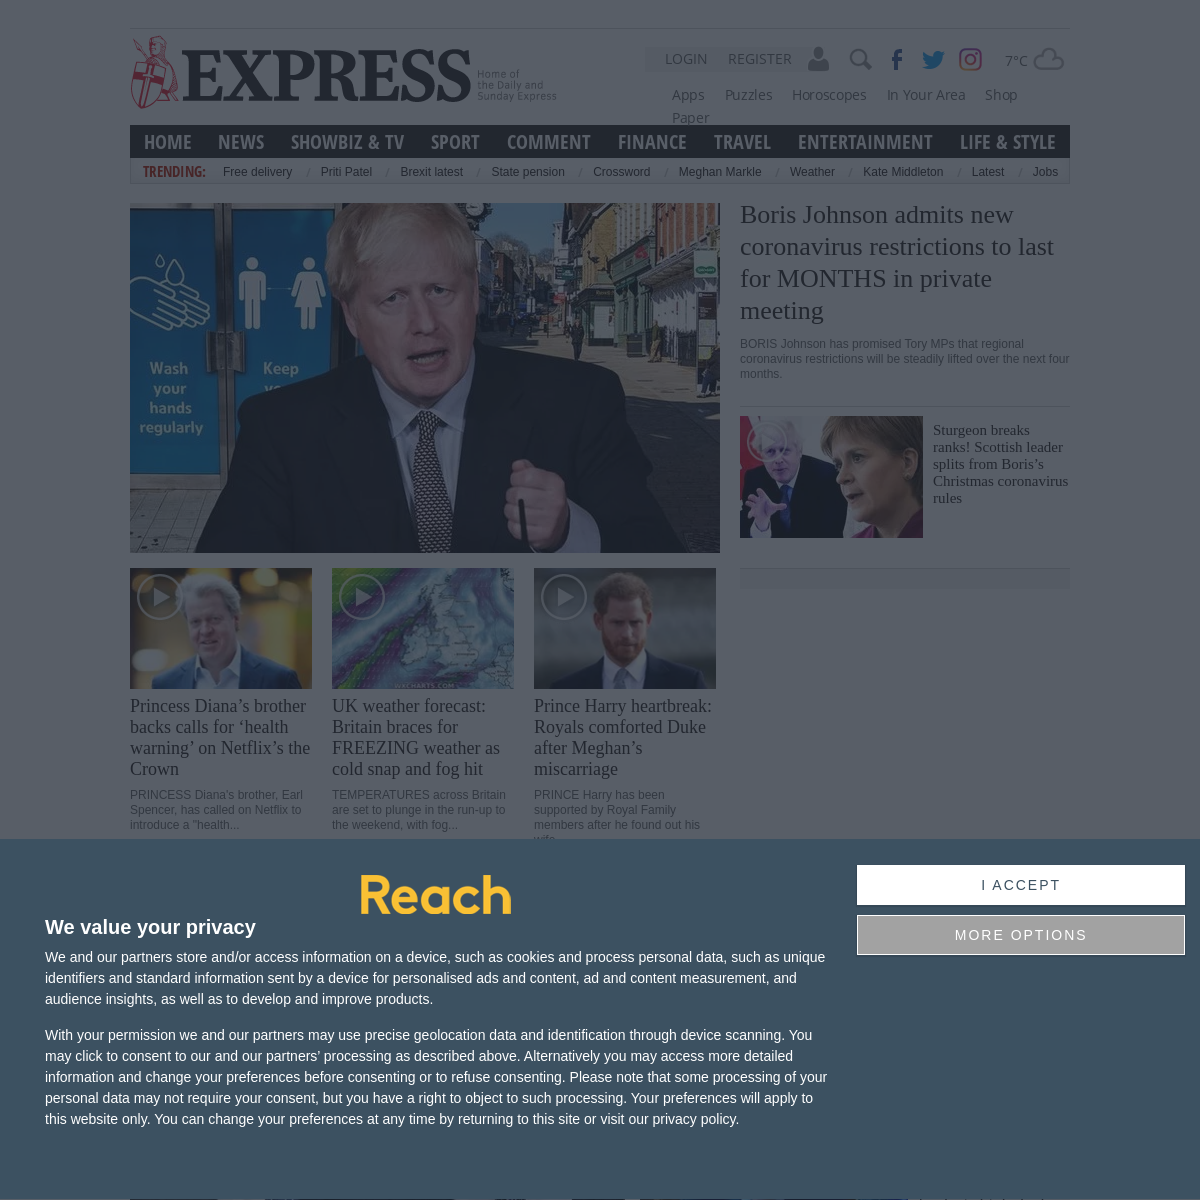 A complete backup of express.co.uk